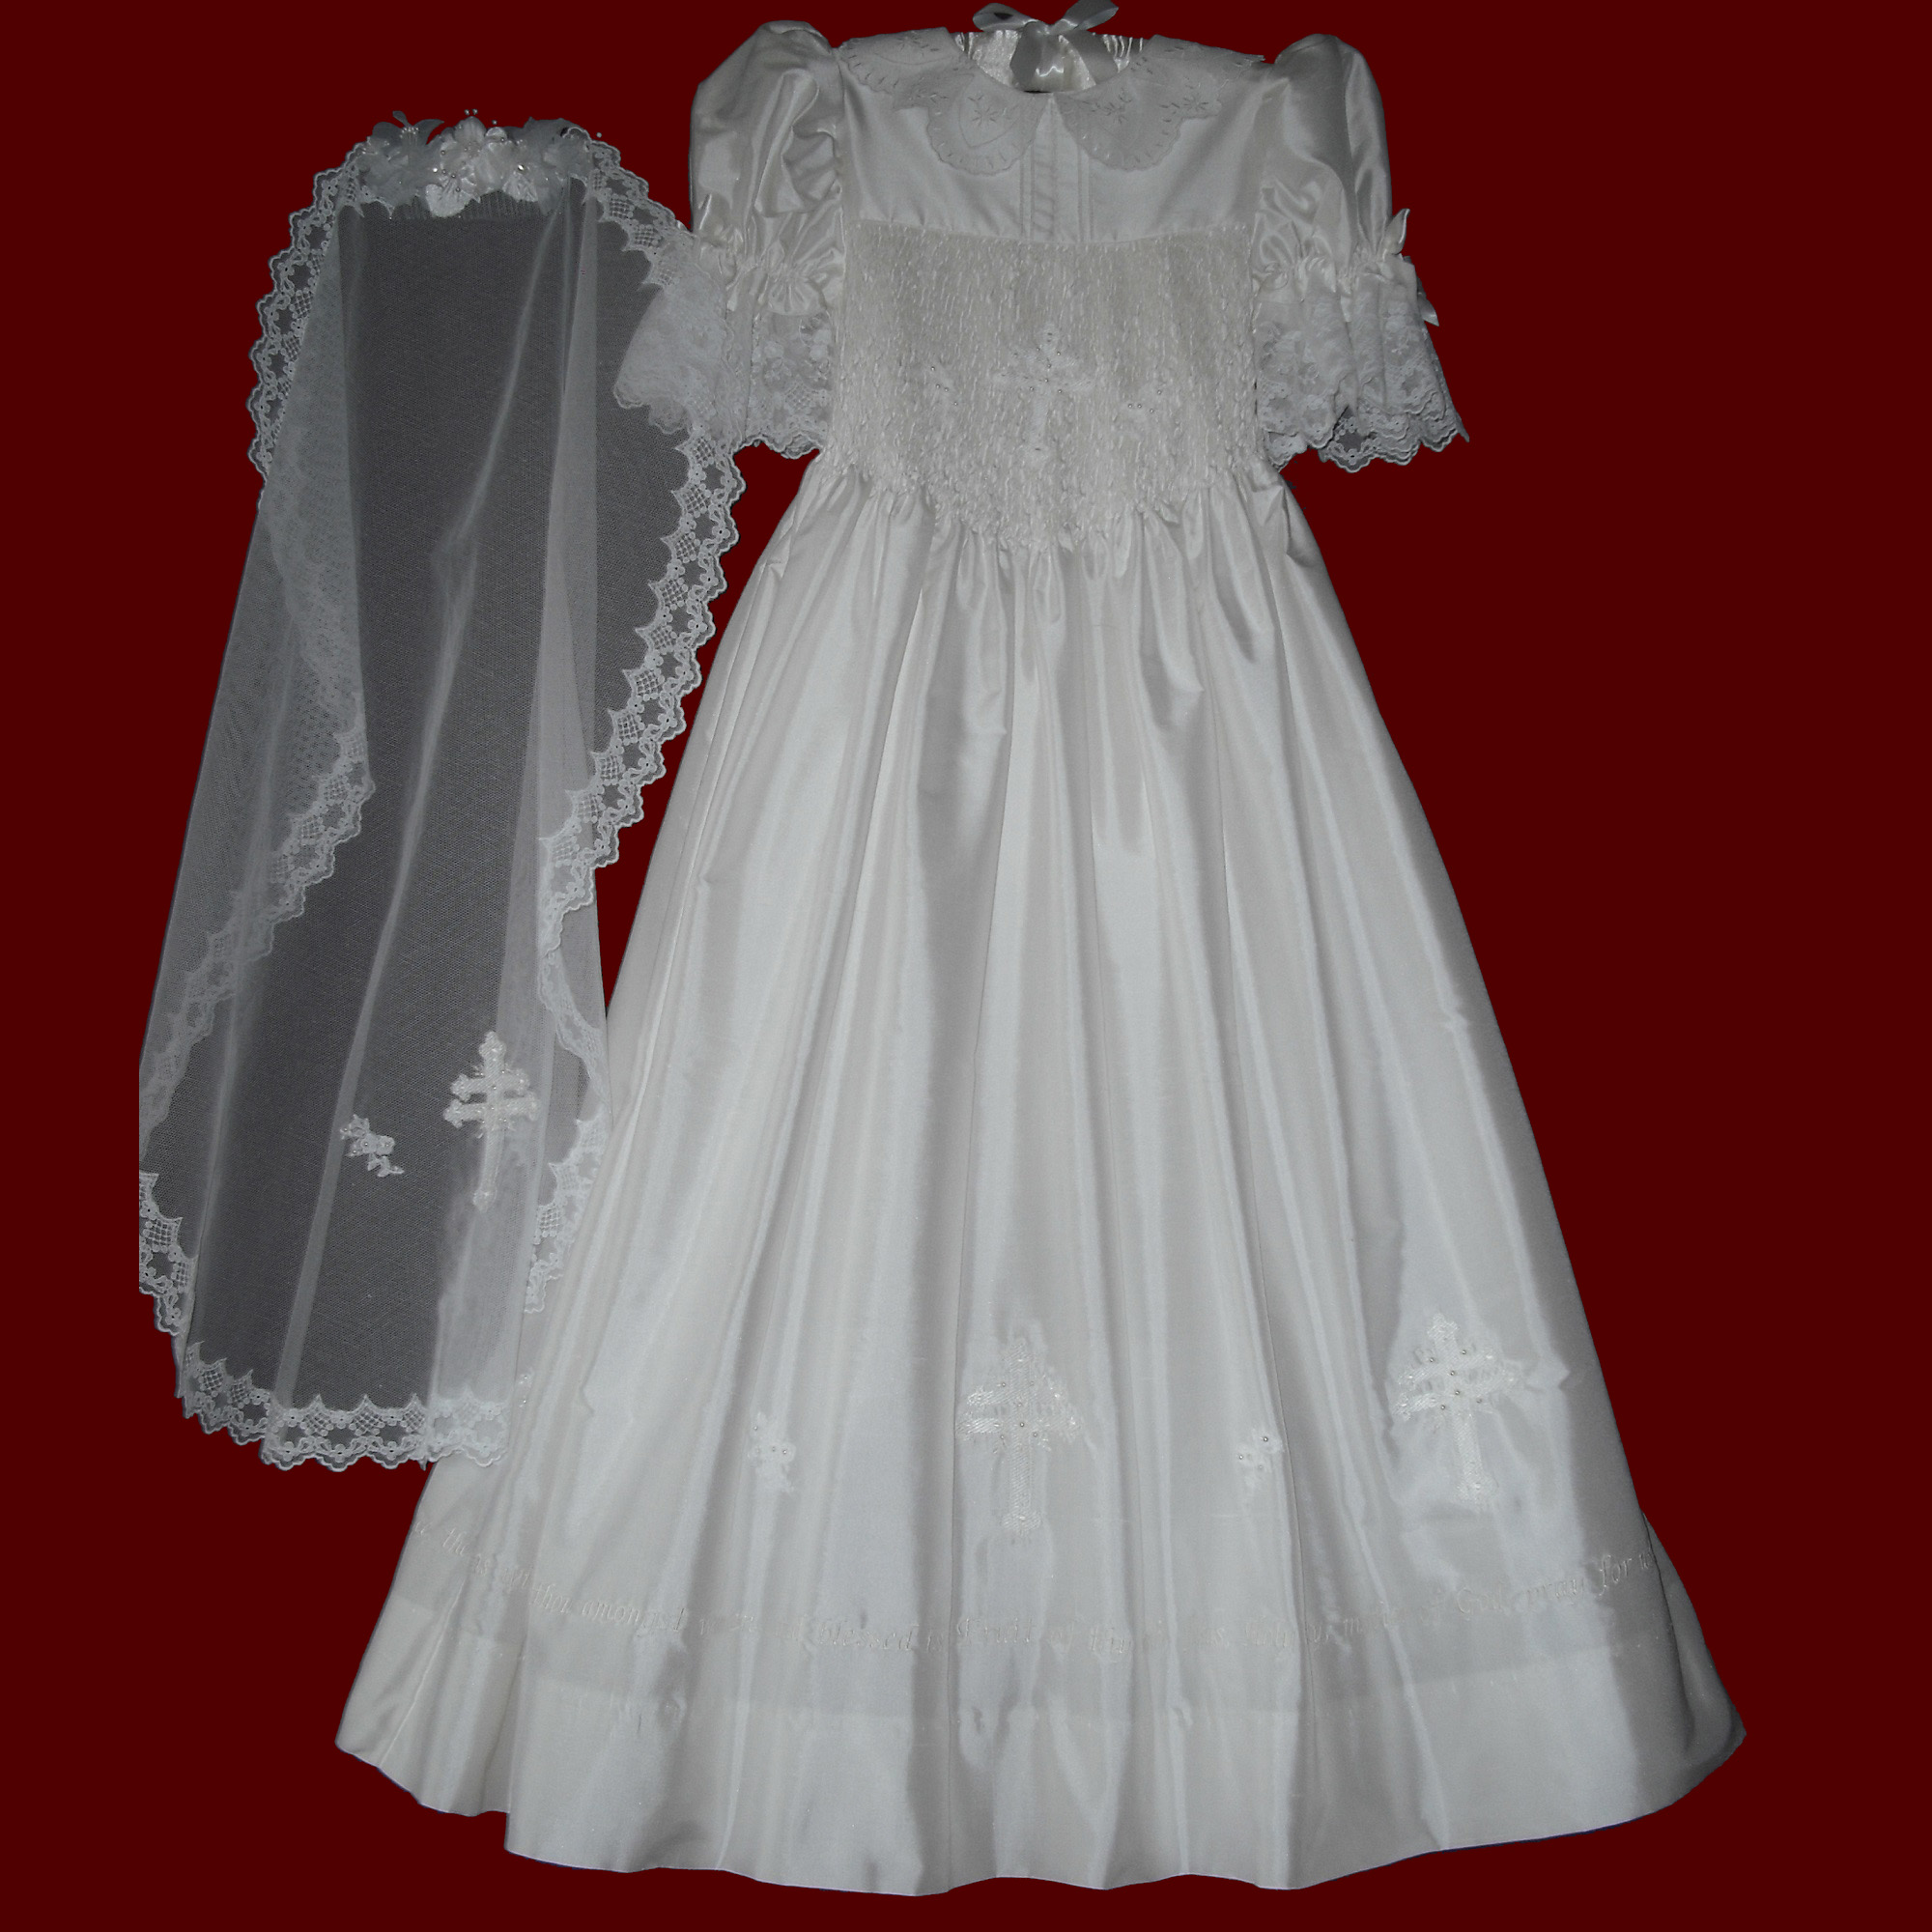 Hand Smocked Communion Dress With Embroidered Hail Mary Prayer & Crosses